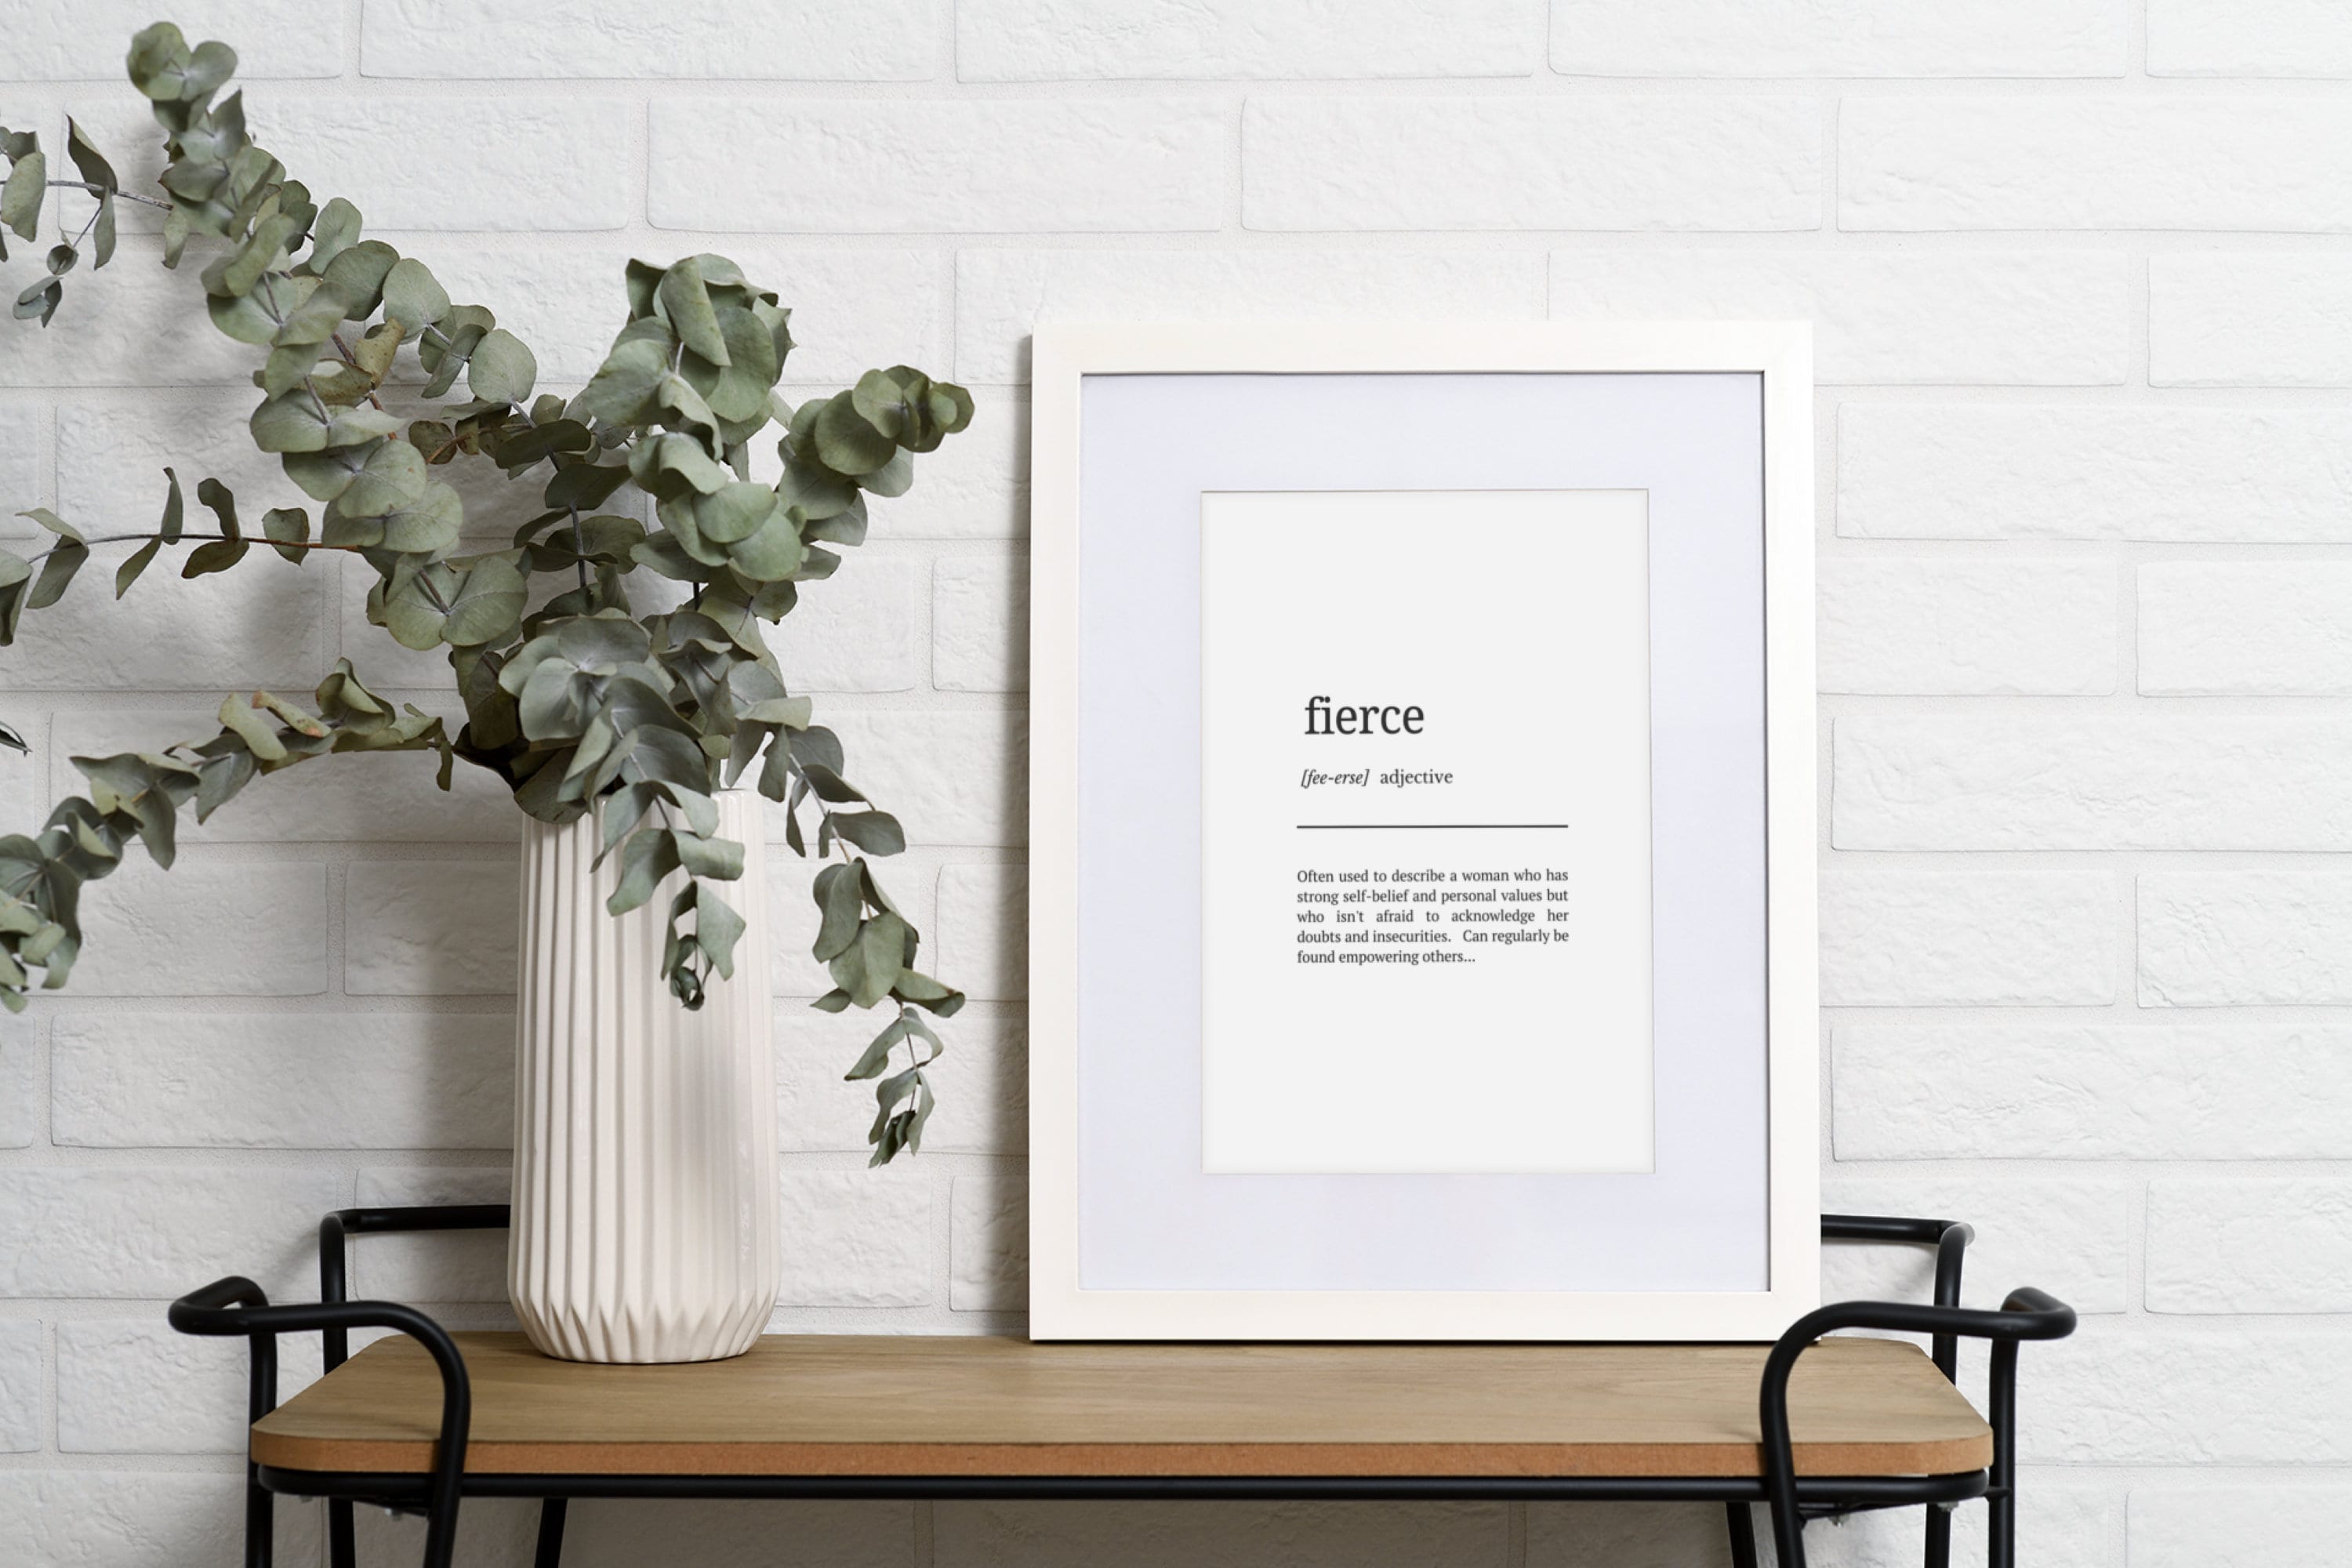 Fierce Definition Poster for Sale by Kweee